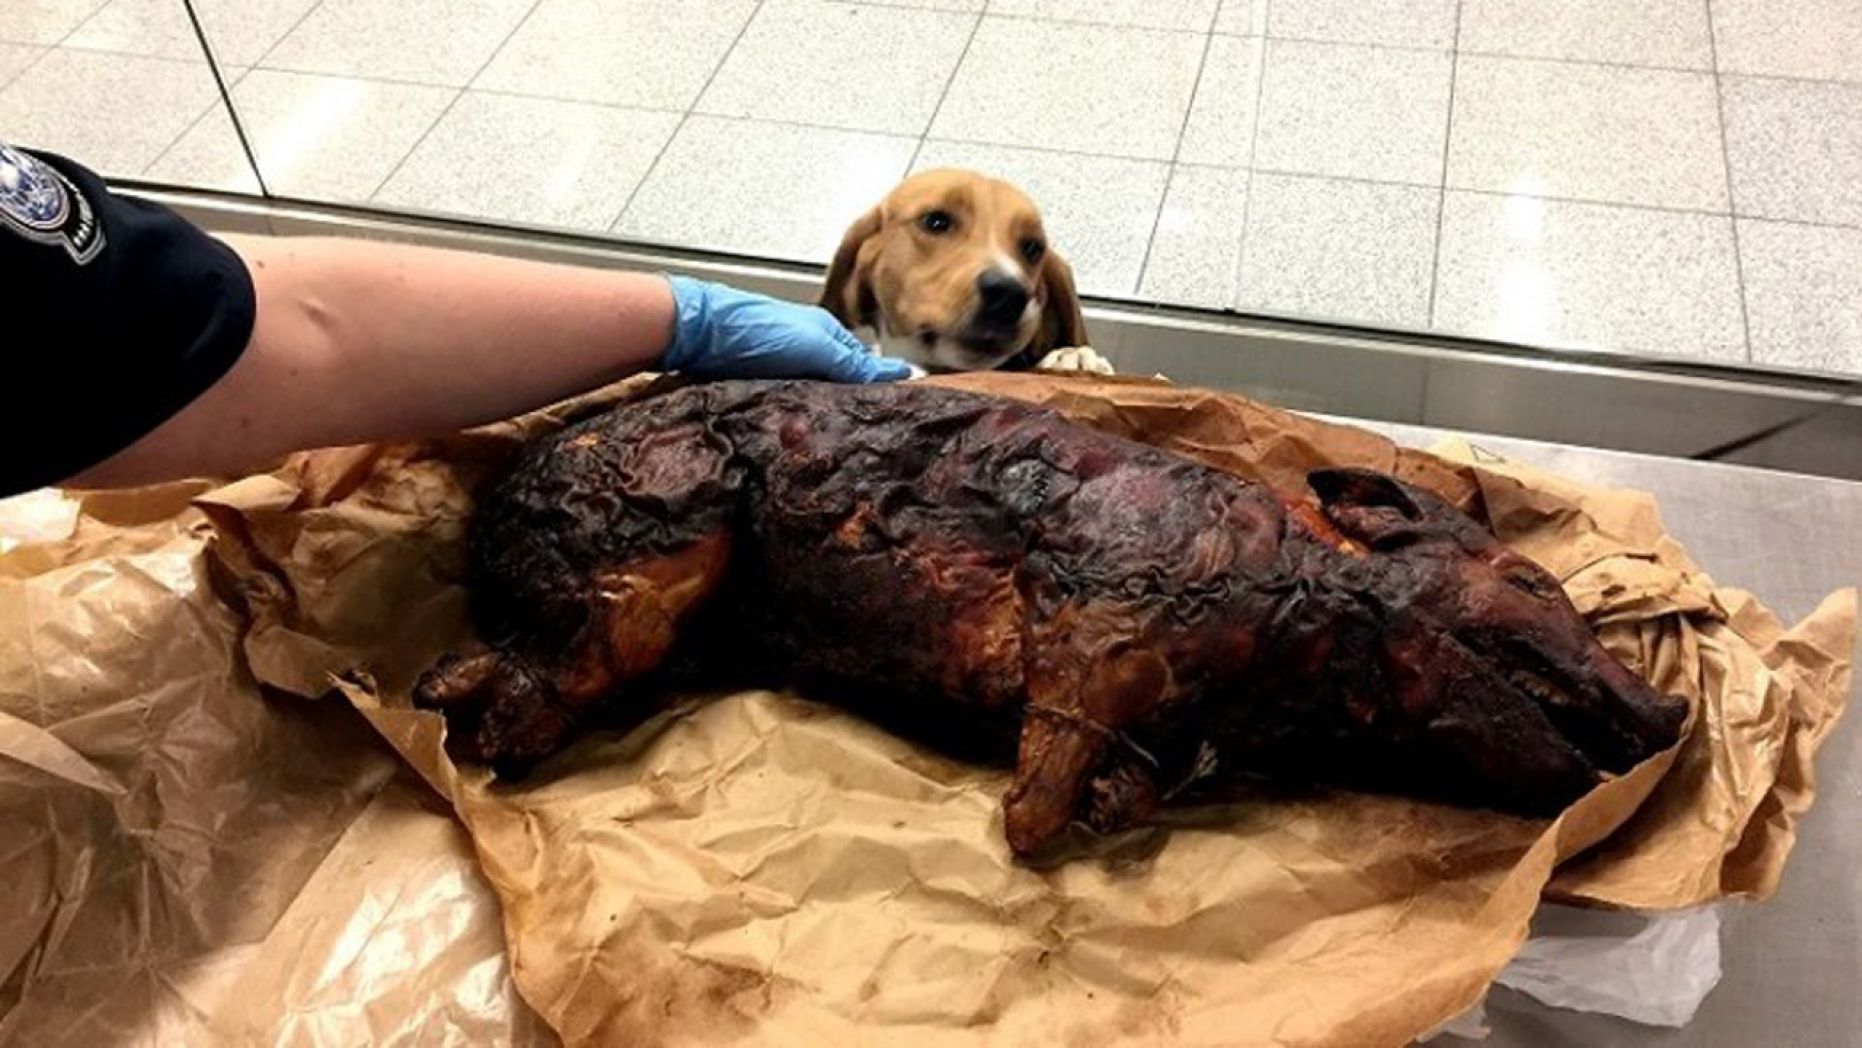 CBP K-9 Beagle Finds Roasted Pig in Luggage at Atlanta Airport